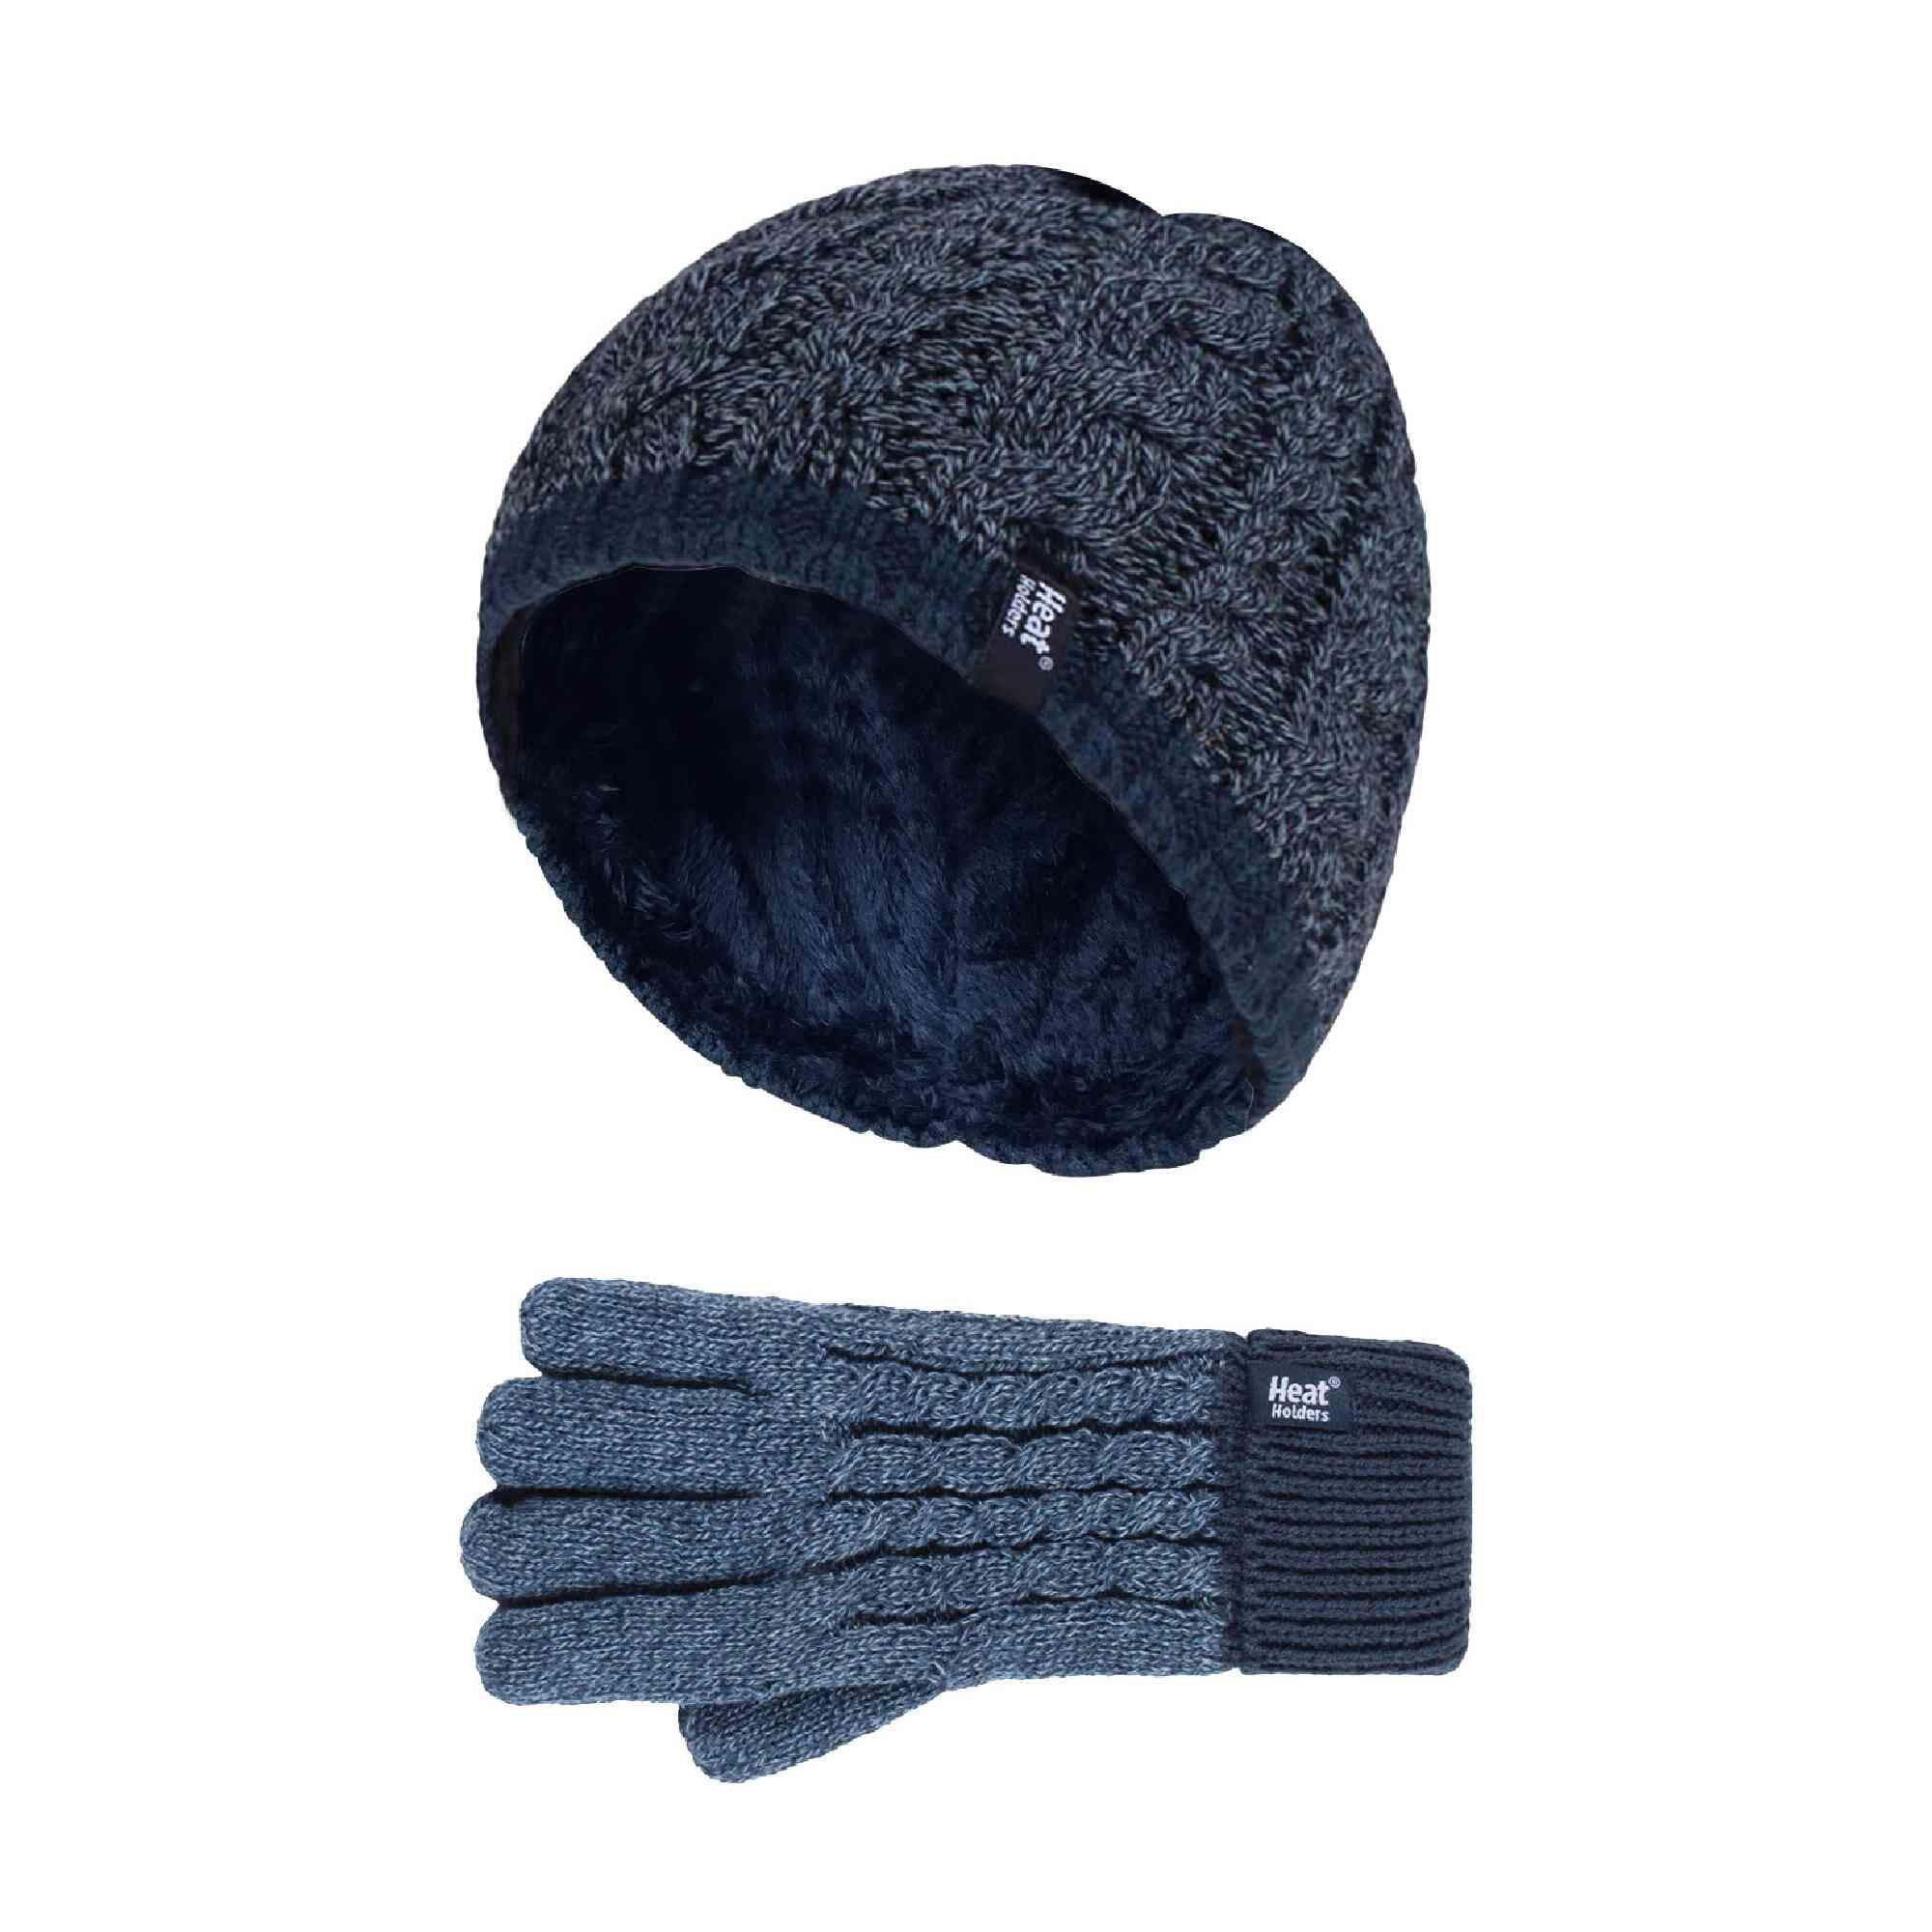 Boys Kids Cable Knit Warm Fleece Lined Thermal Winter Hat and Gloves Set 1/4